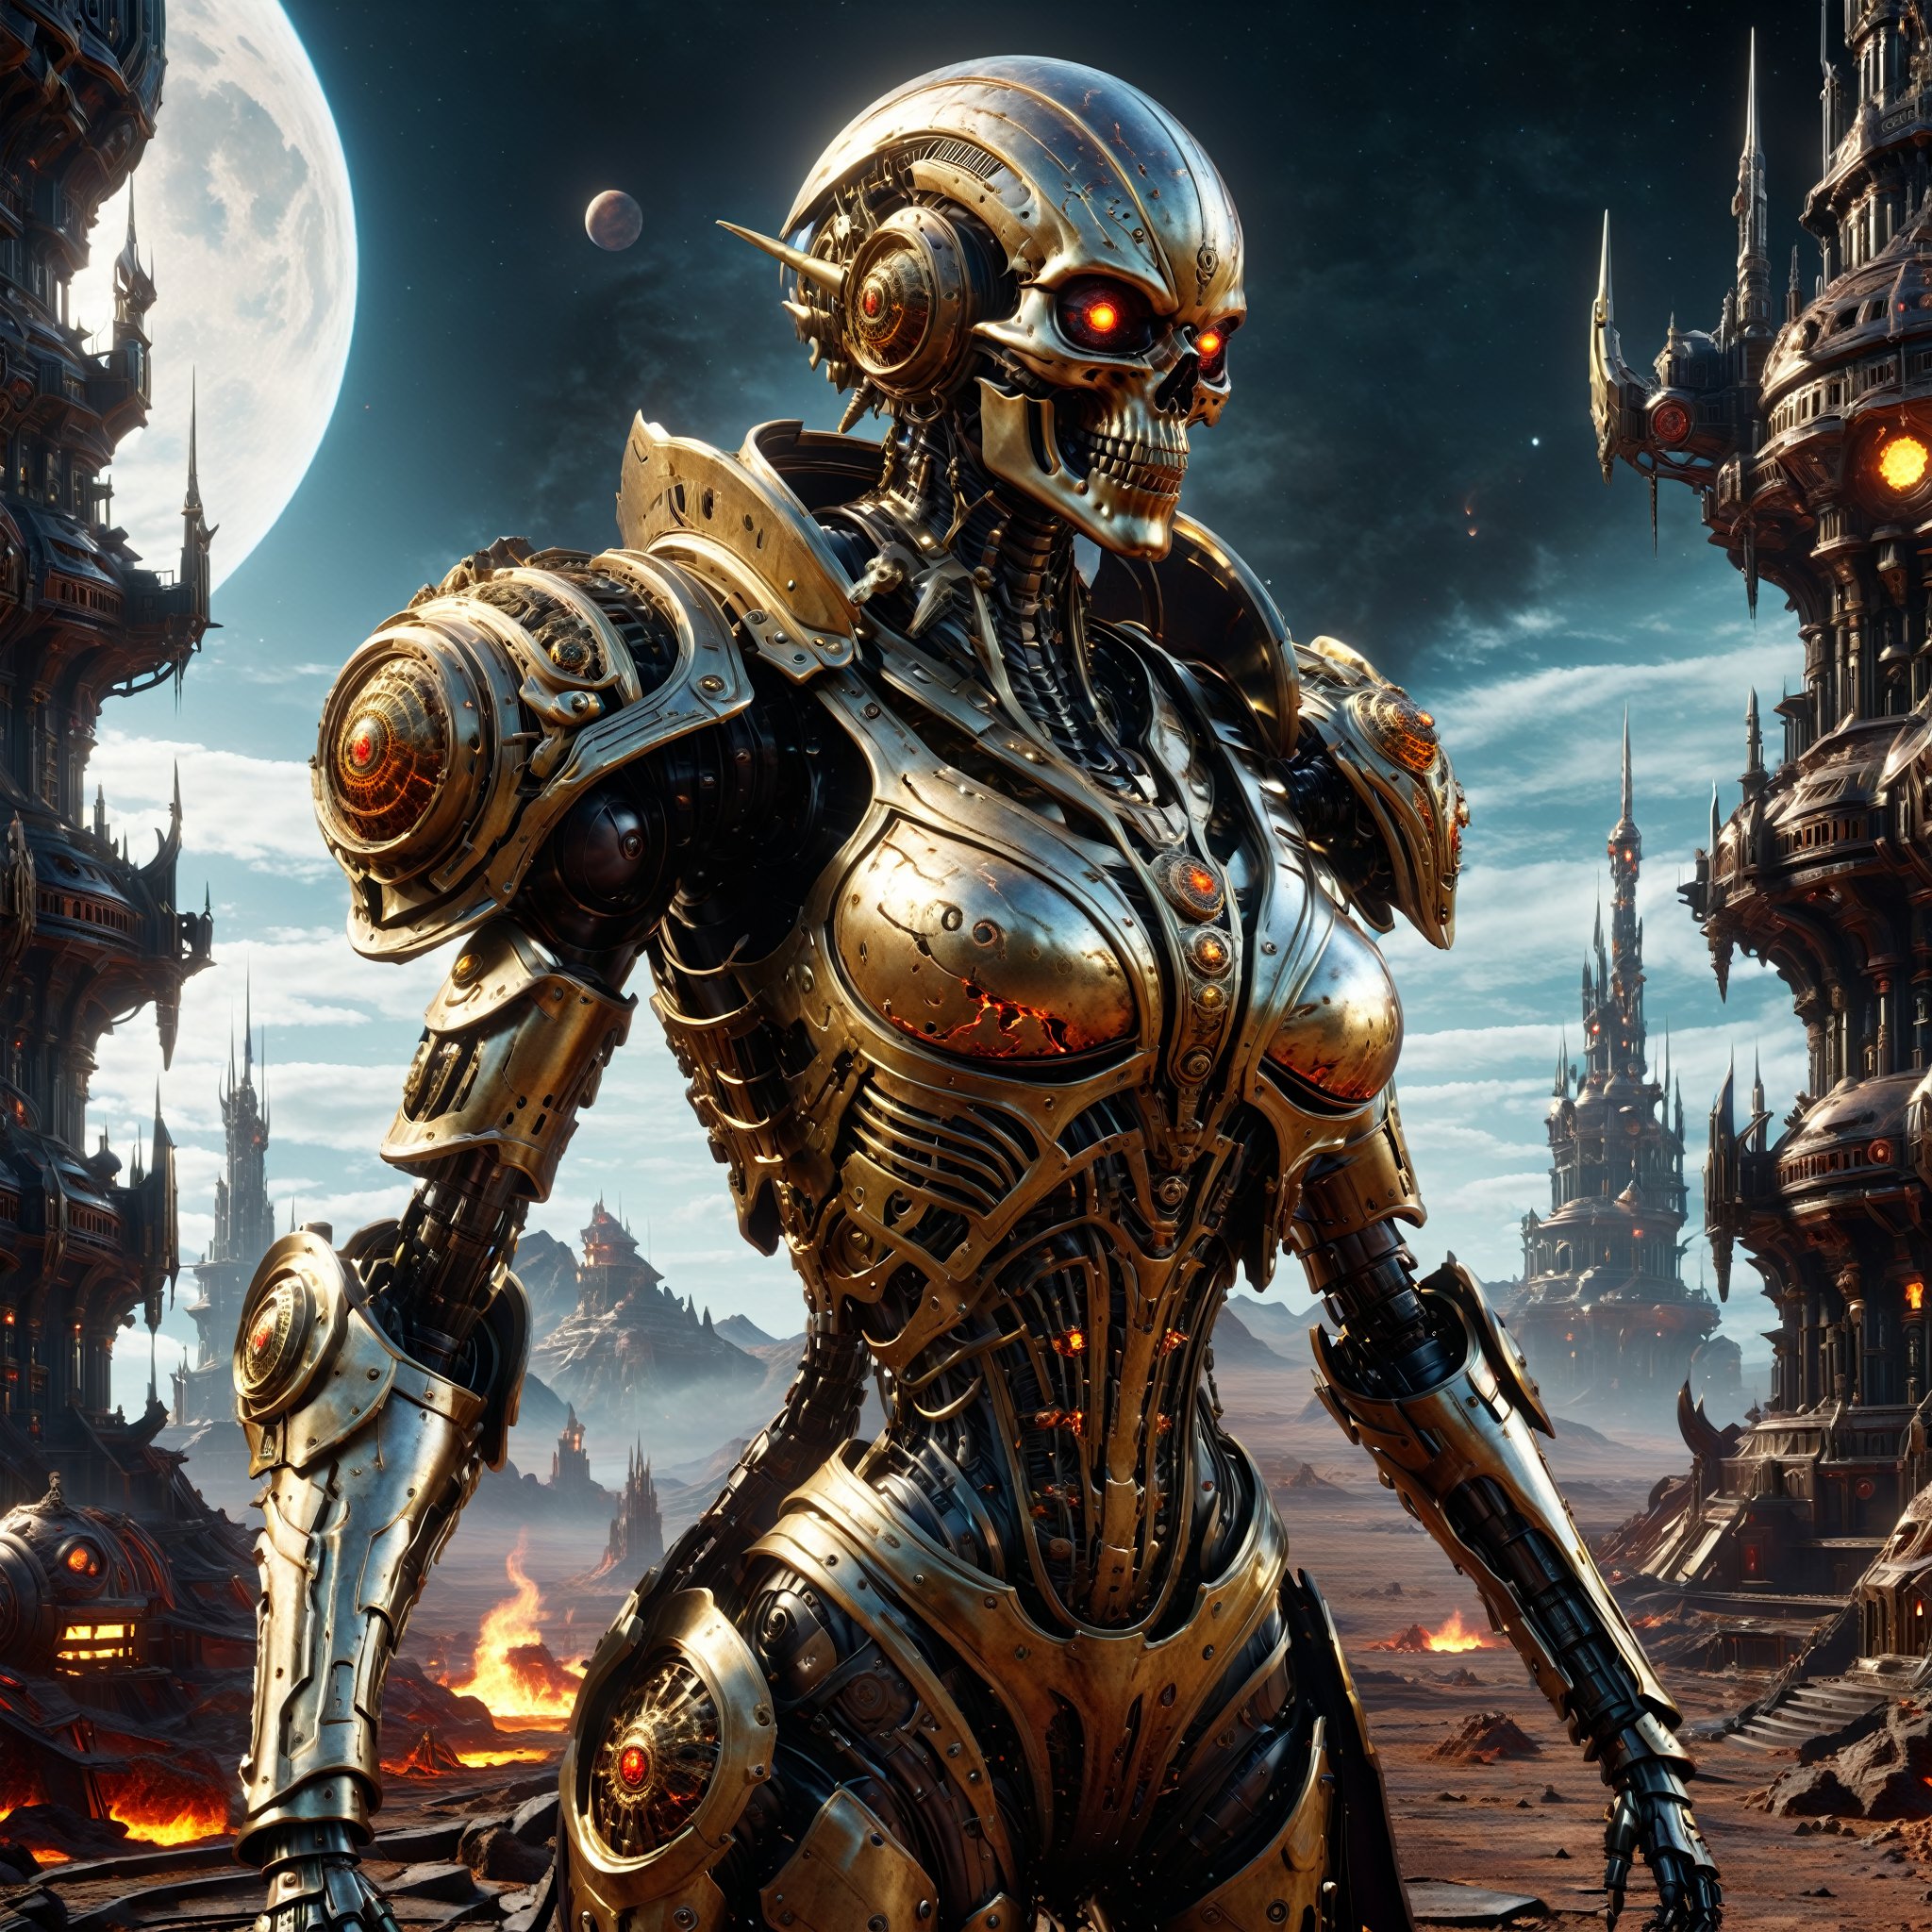 (female death robot,  full body shot,  armour, hellish background,  Infernal,  Apocalyptic,  Hellfire,  Tormented souls,  Swirling chaos,  Blazing torment,  Searing heat,  Cursed existence,  Demonic hordes,  Endless suffering,  Chaotic ruins,  Eternal punishment,  Fiery abyss,  Malevolent shadows,  Wretched desolation,  Unholy realm,  Abyssal depths,  Sinister echoes,  Forsaken wasteland,  Fiendish landscape)

6K Octane Render,  Exceptional intricacy,  Work of art,  Ultra-detailed,  Precisely crafted elements,  16K resolution,  Created with Maya,  Showcase on Behance Pro,  Powered by Unreal Engine 6,  Produced in Houdini,  Cyberpunk,  Forward-looking,  Gaining momentum on Artstation,  Grandiose,  Cinematic ambiance,  Intense,  Futuristic sci-fi,  Masterwork,  Unmatched quality, , , 
,Renaissance Sci-Fi Fantasy